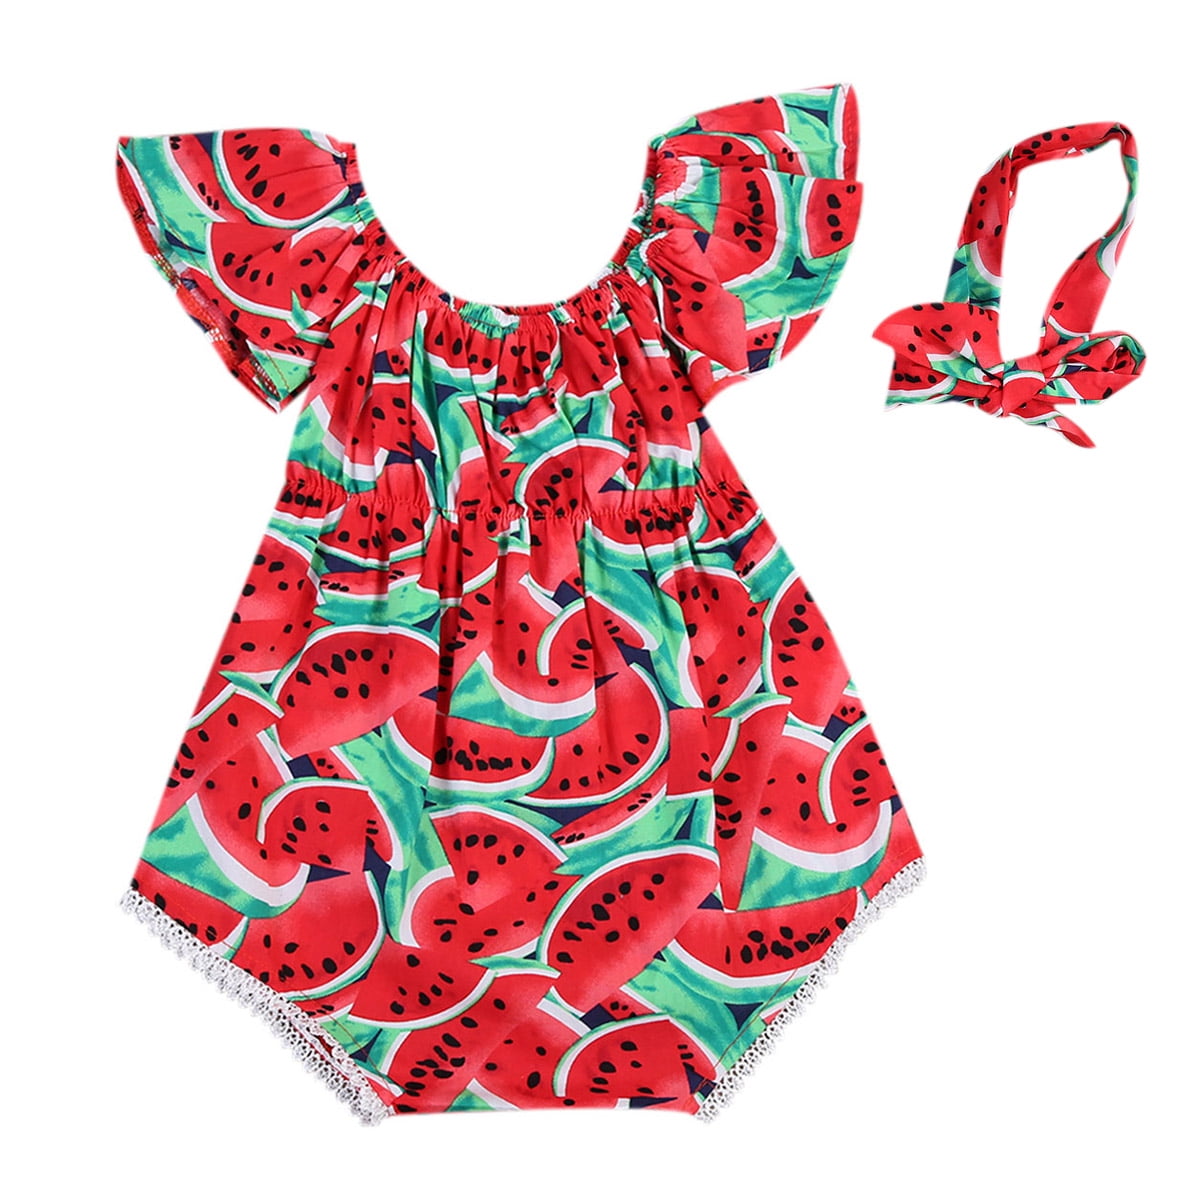 Infant Baby Girls Watermelon Outfits Clothes Romper Bodysuit Jumpsuit Headband 